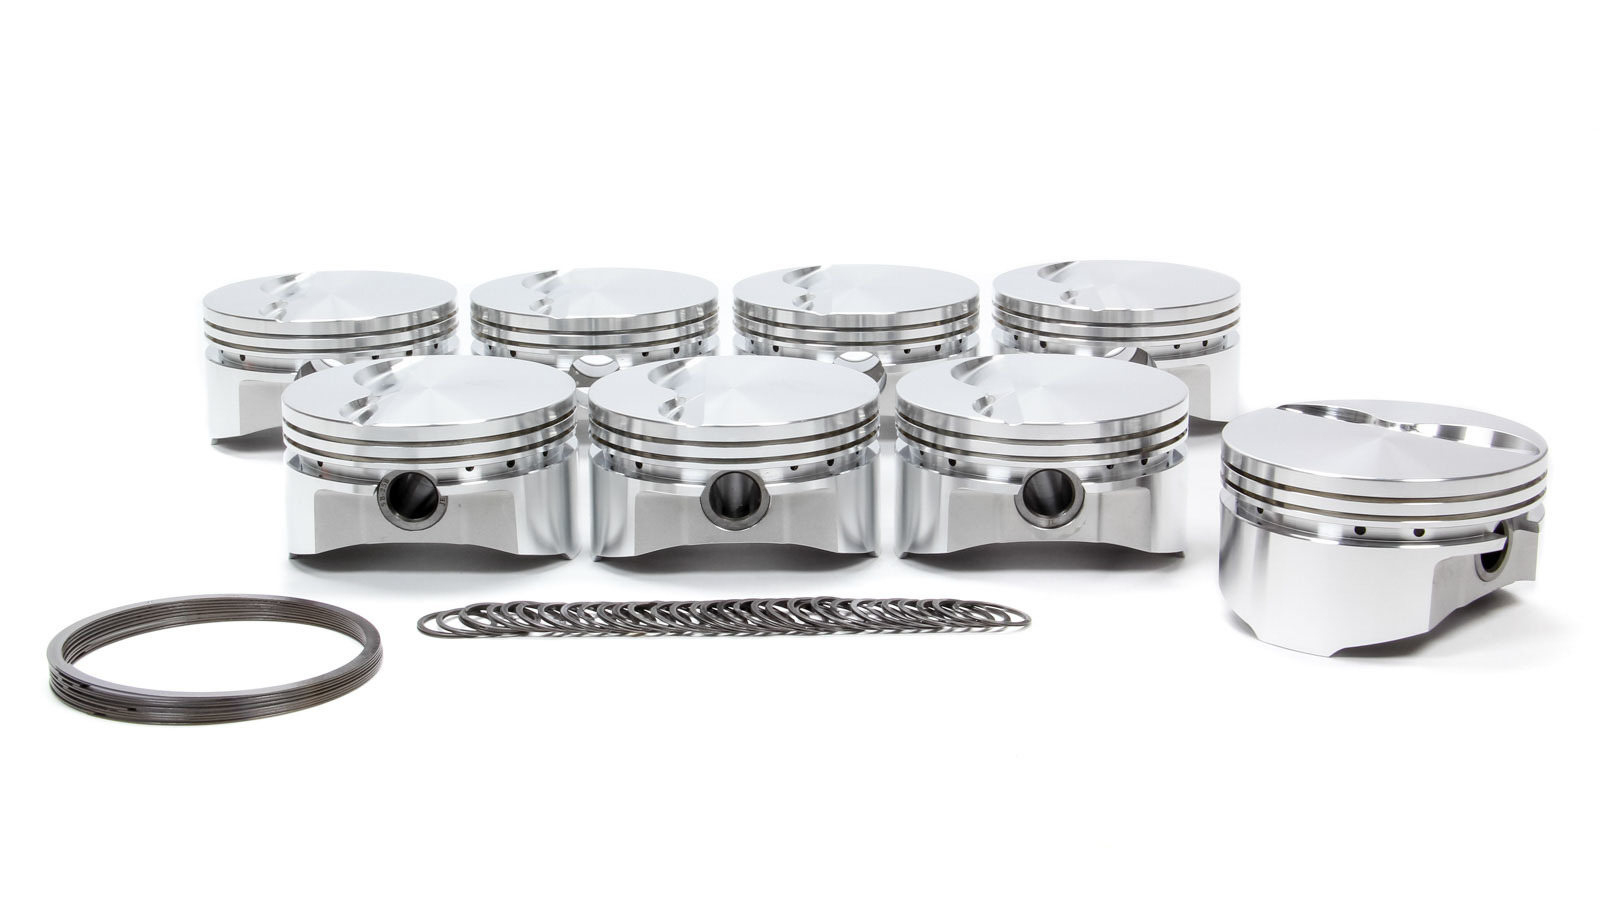 SRP Pistons 140689 Piston, Windsor Flat Top, Forged, 4.030 in Bore, 1/16 x 1/16 x 3/16 in Ring Grooves, Minus 5.00 cc, Small Block Ford, Set of 8